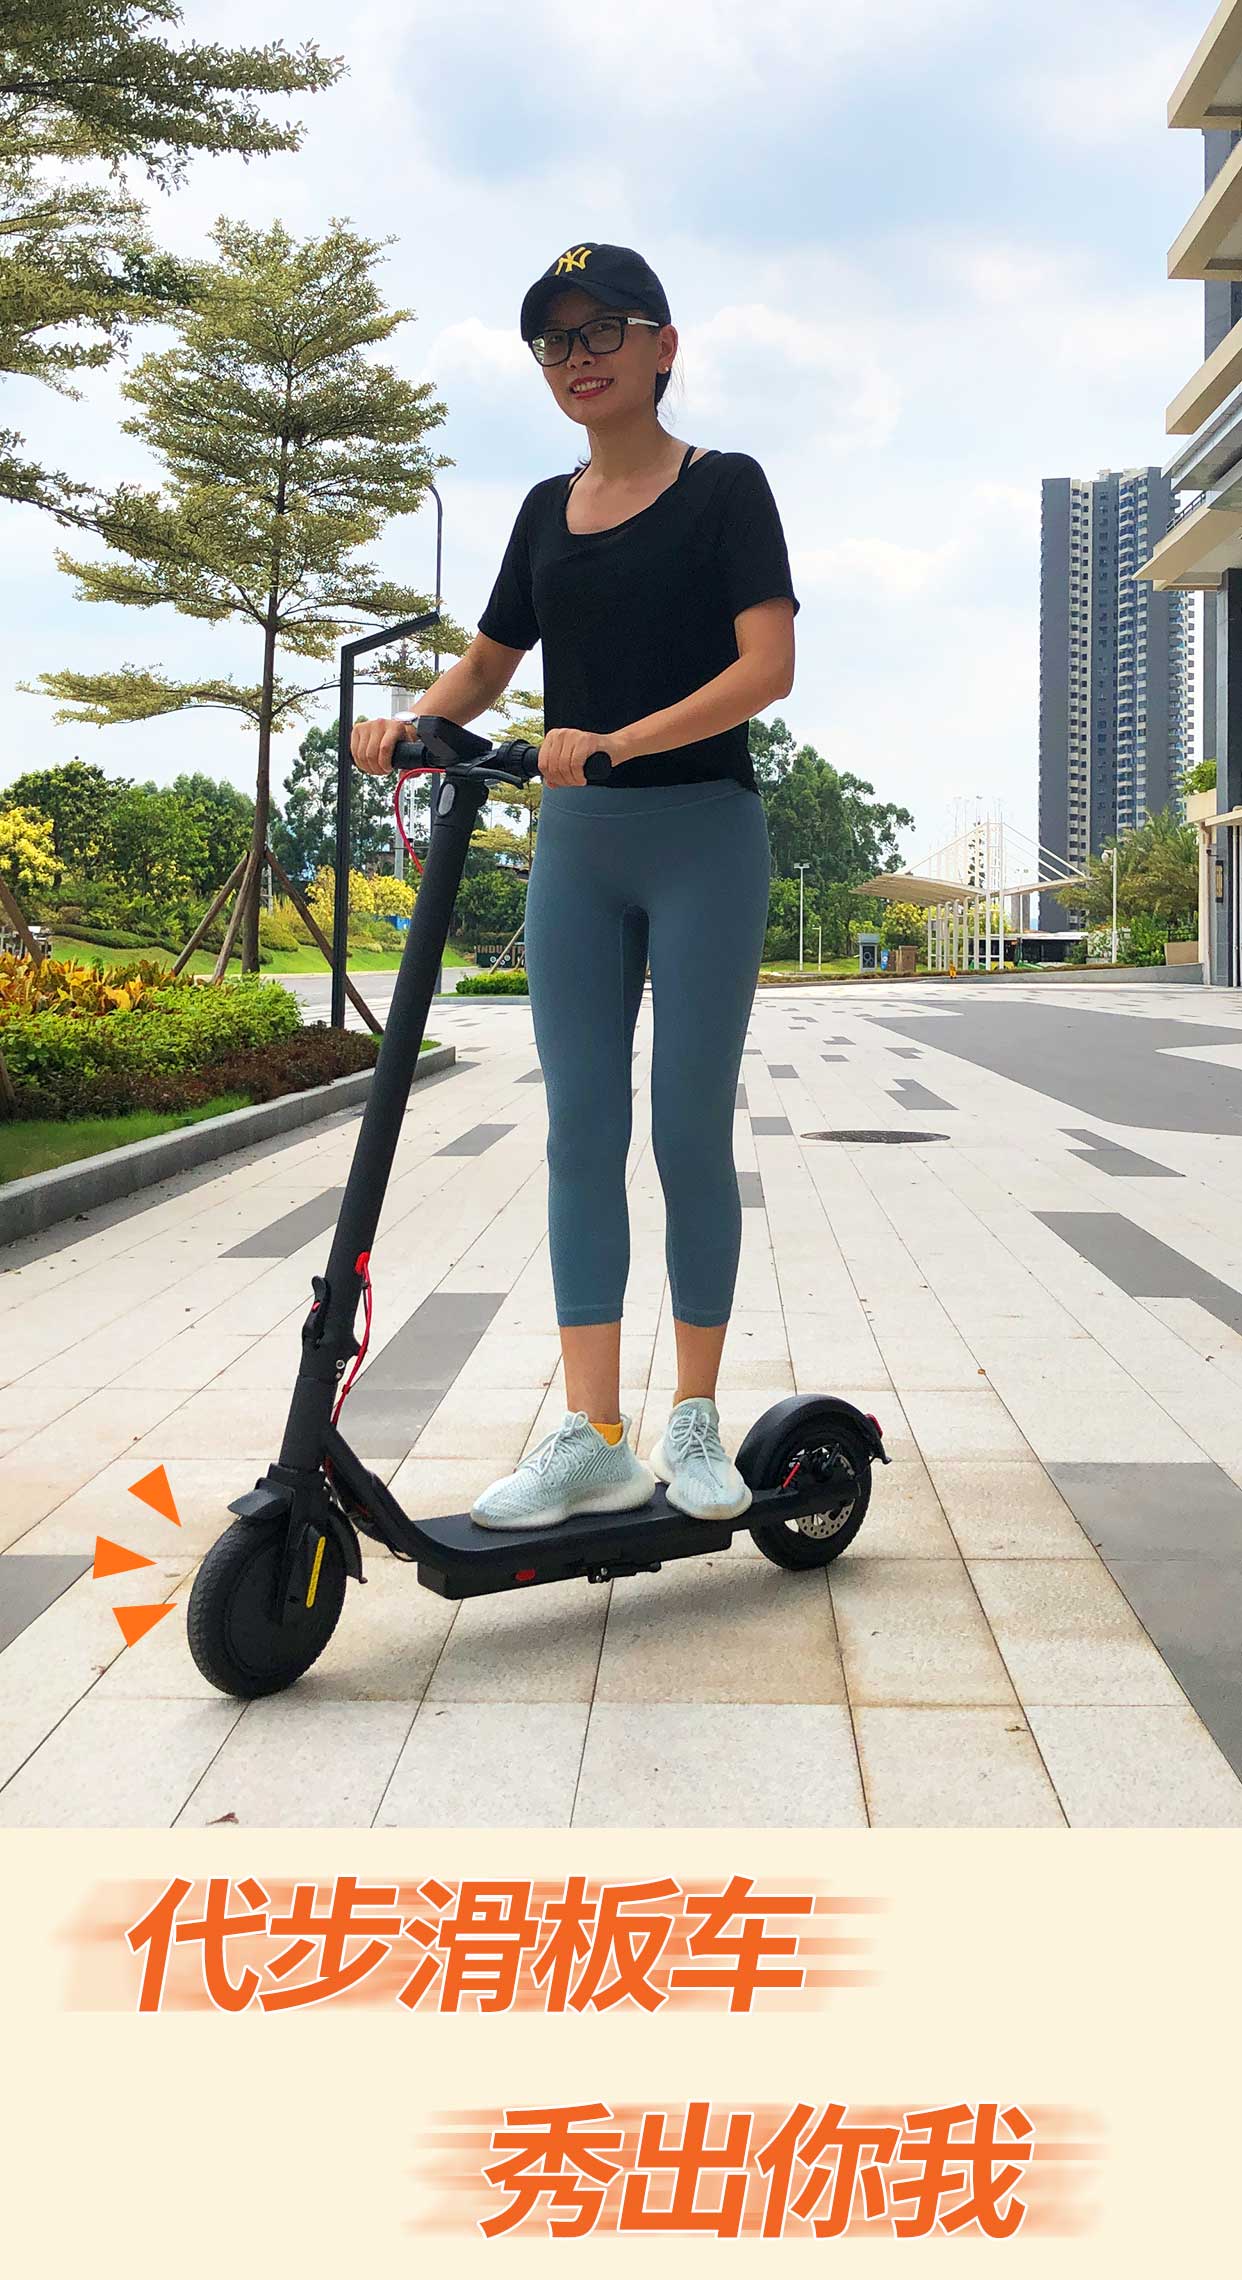 Chine 2019 offre spéciale Freego ES-08s V1.9 8.5inch e-scooter à 2 roues pour 36v 350w fabricant